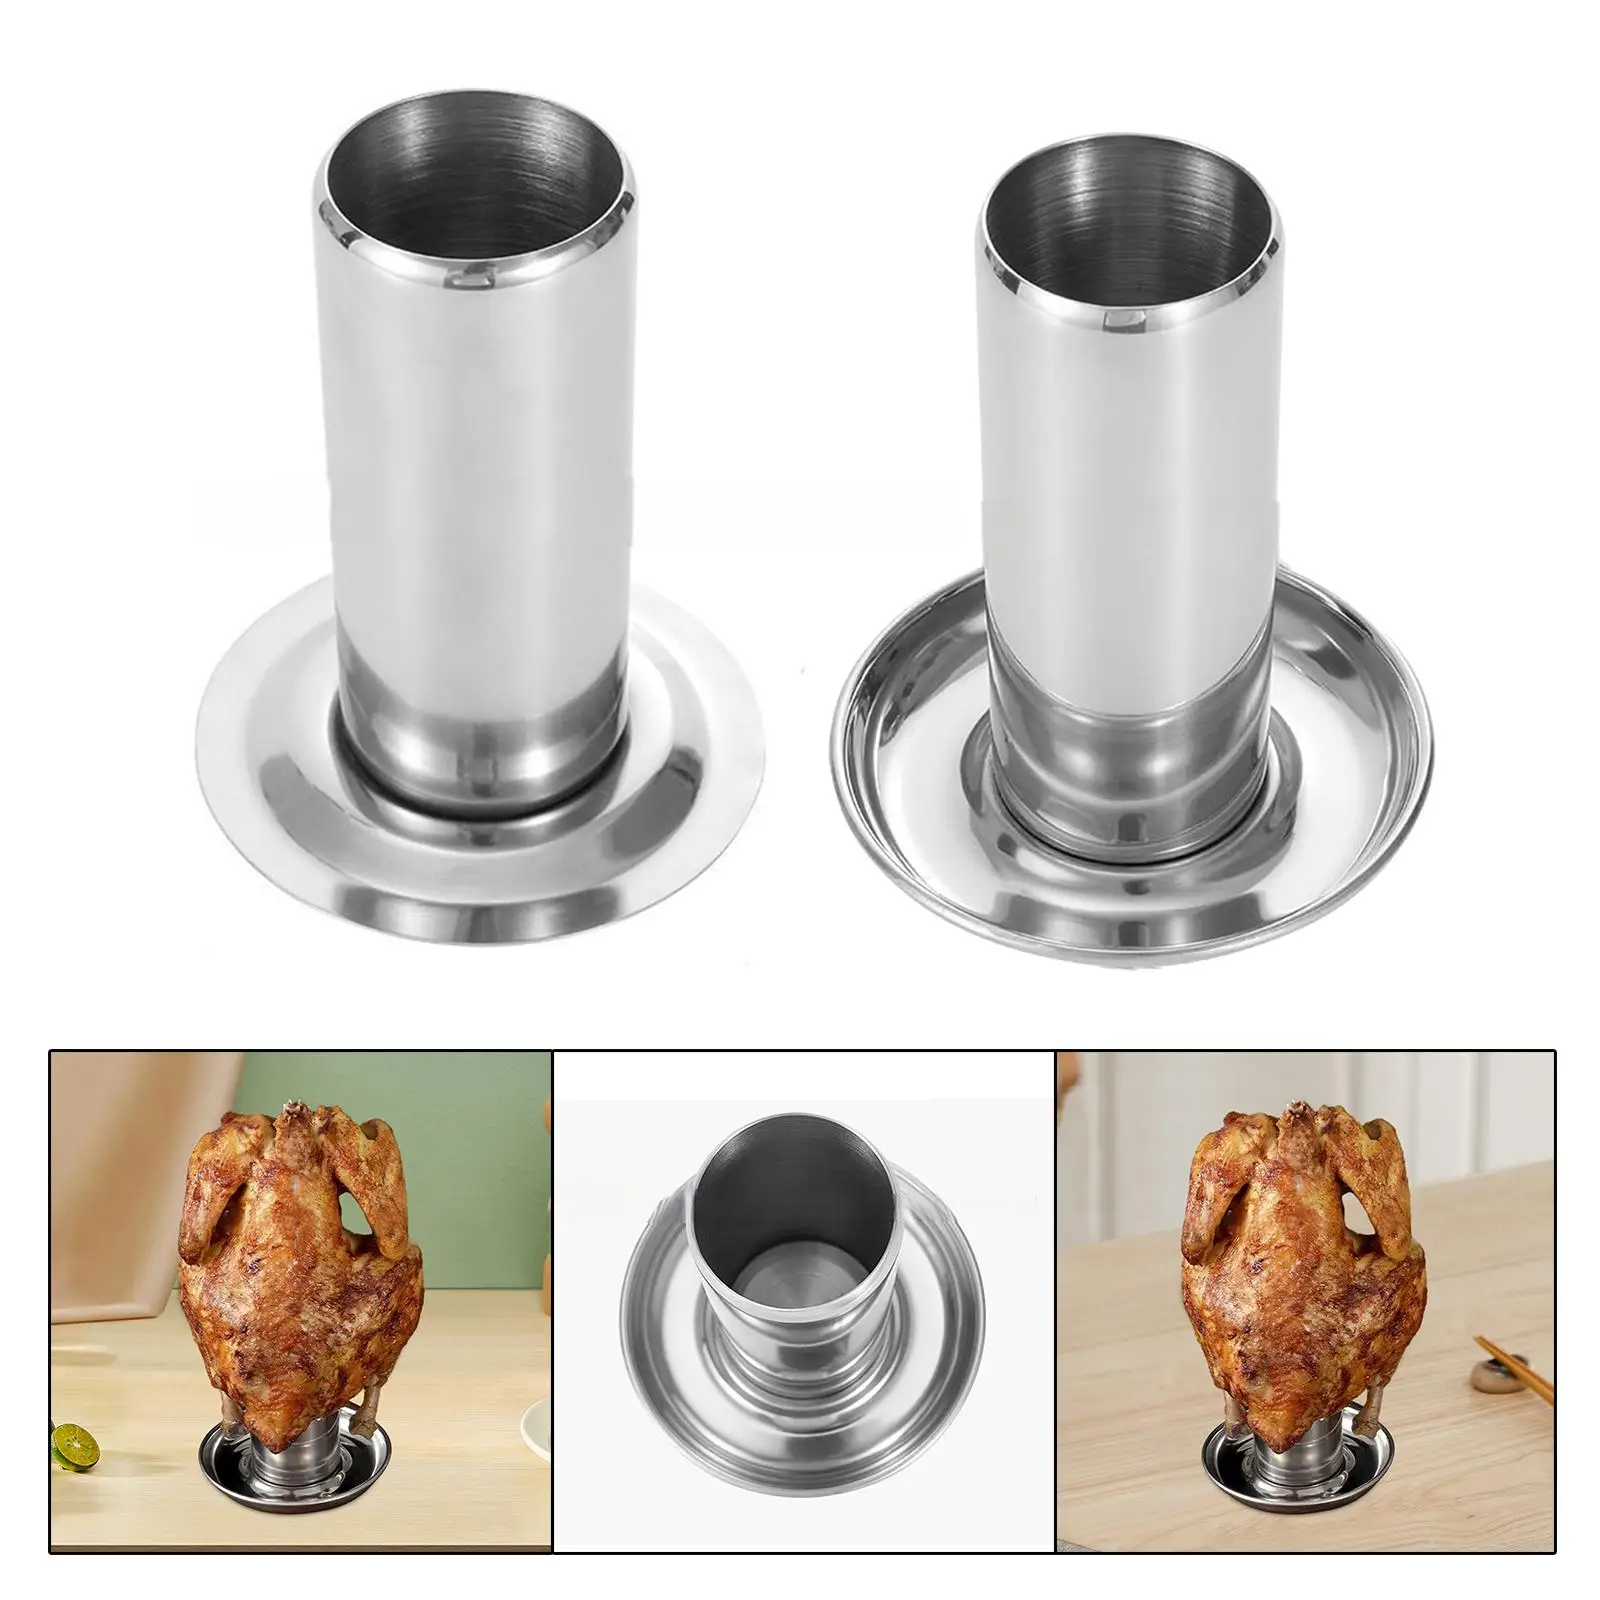 Stainless Steel Grill Beer Chicken Holder, Roaster Grill Rack, Barbecue Grill Turkey Roasting Rack Outdoor BBQ Tool